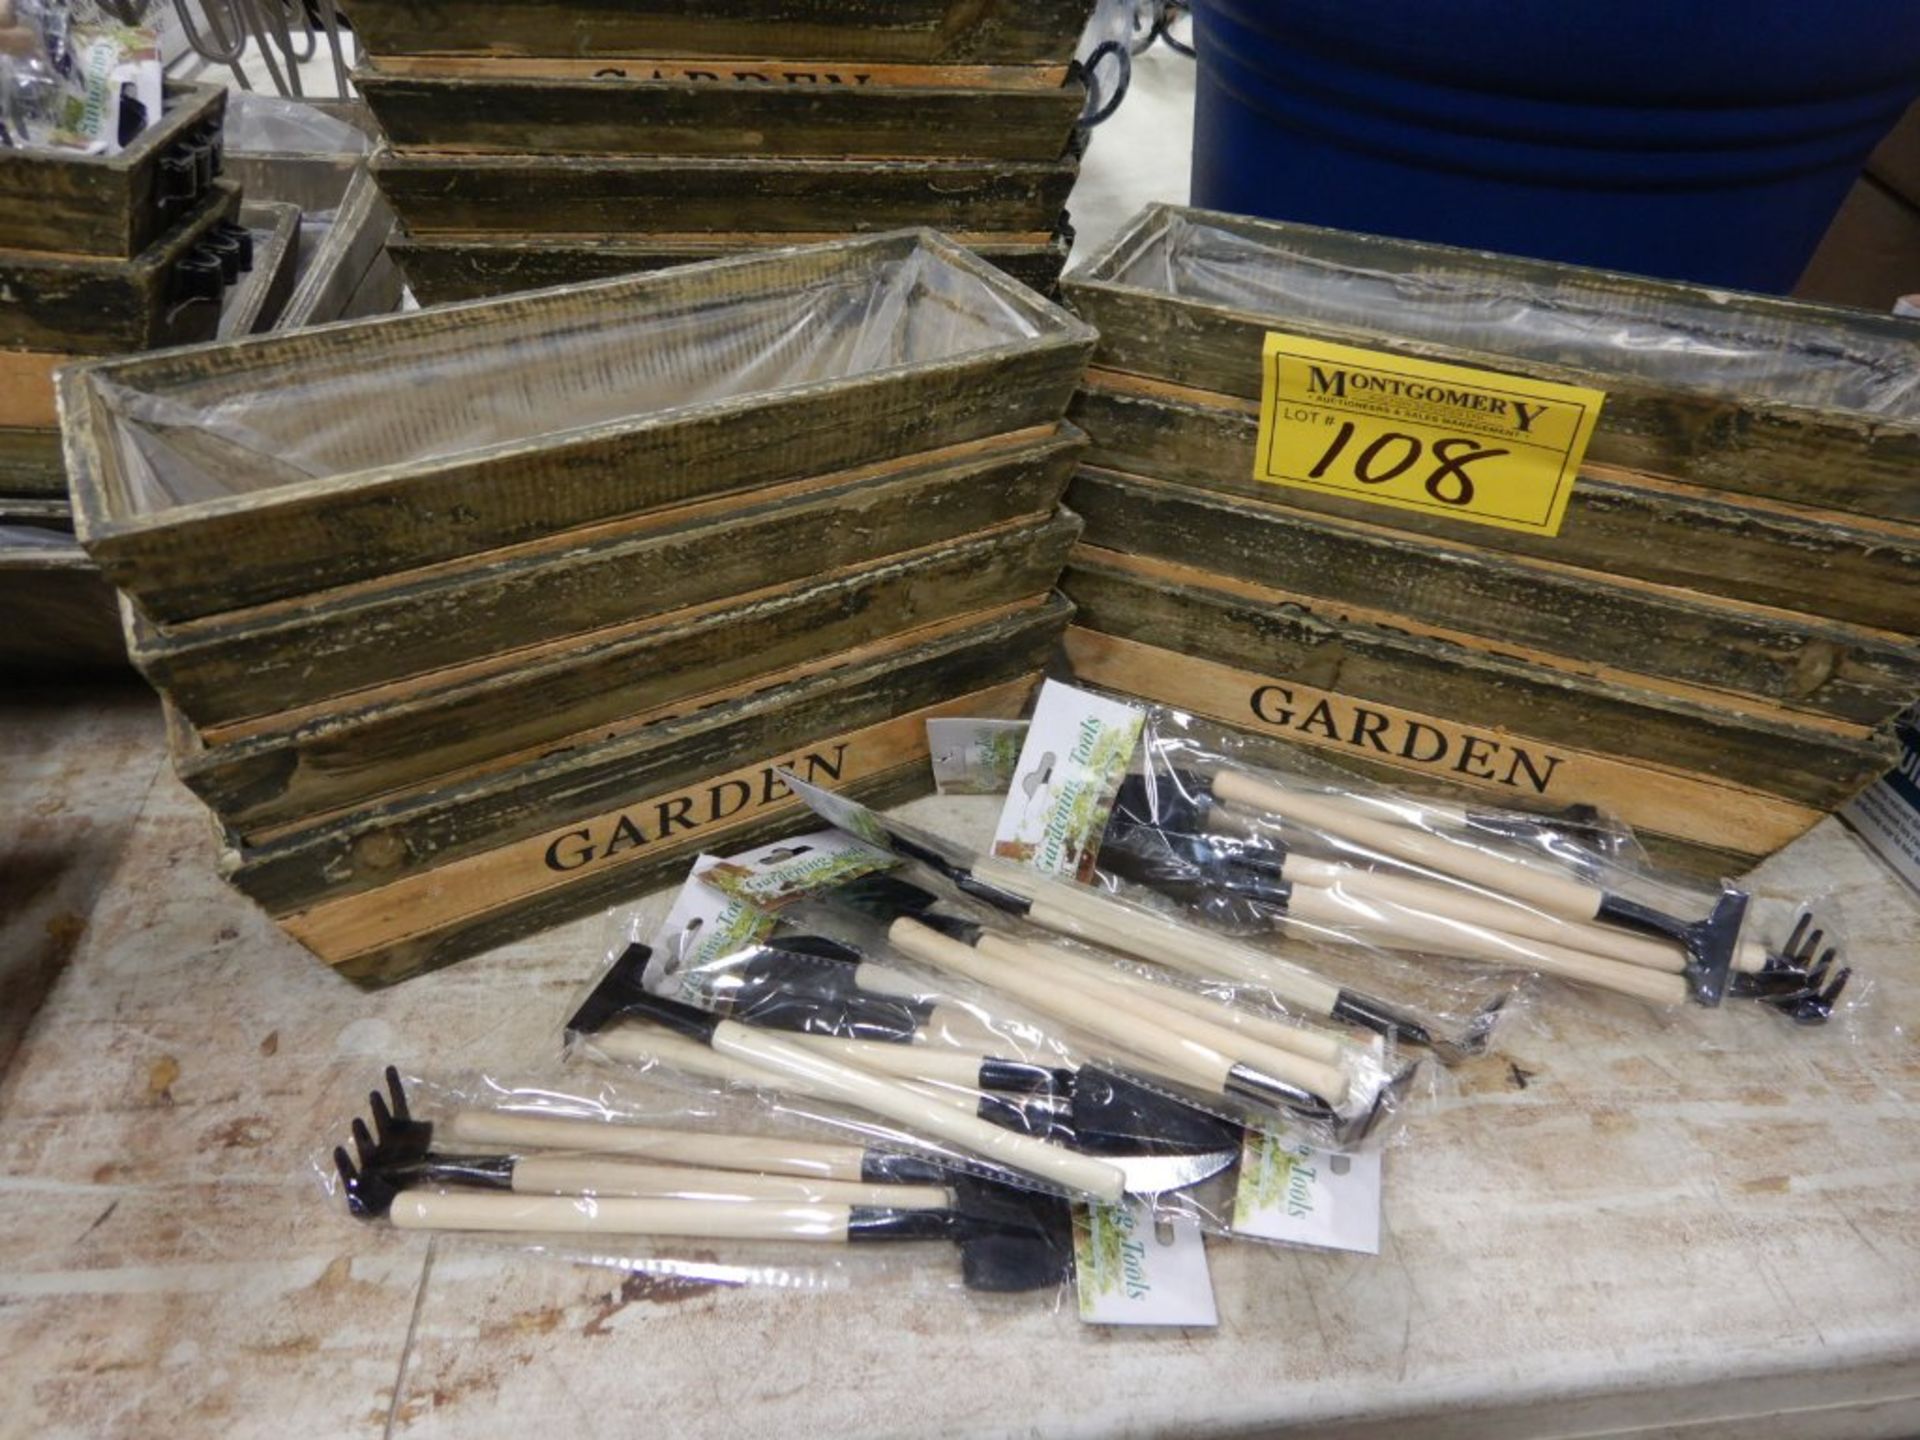 L/O GARDEN WOODEN PLANT BOXES, L/O SMALL GARDENING TOOLS